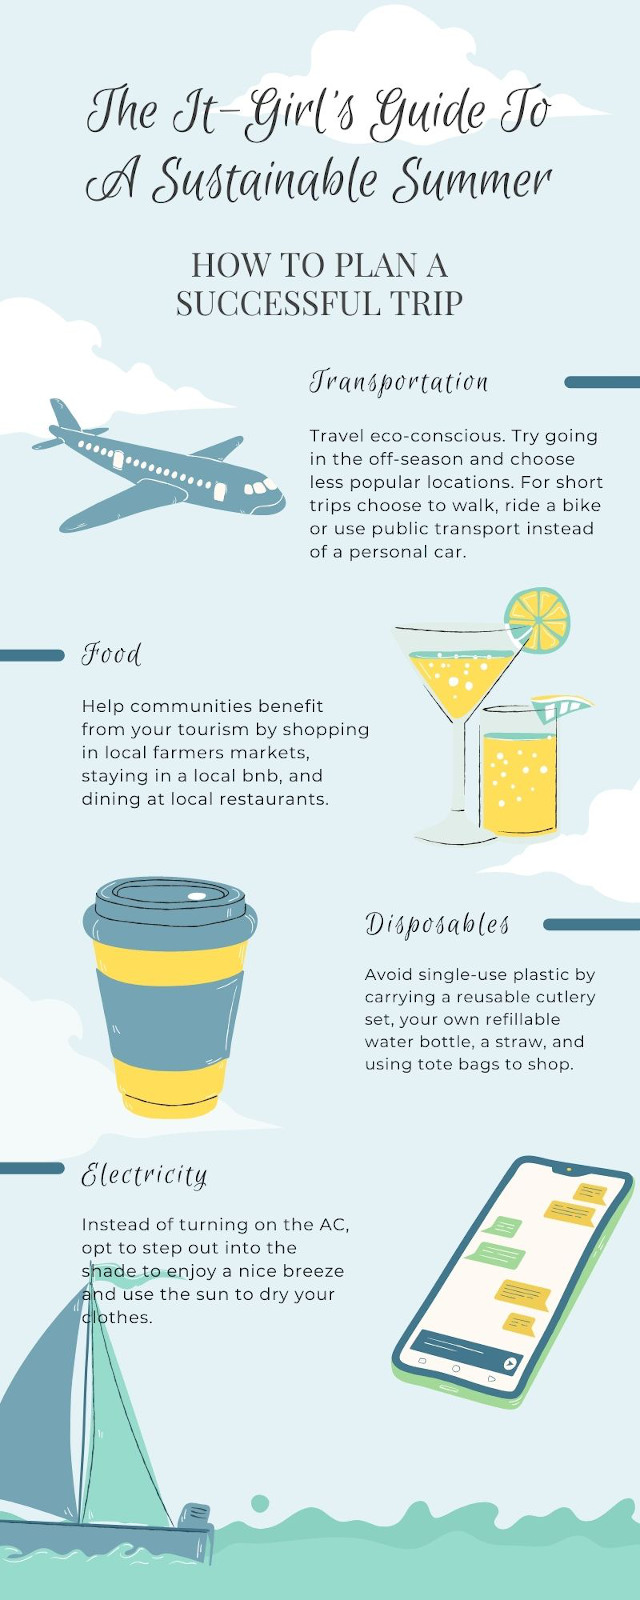 Guide to a sustainable summer - Infographic